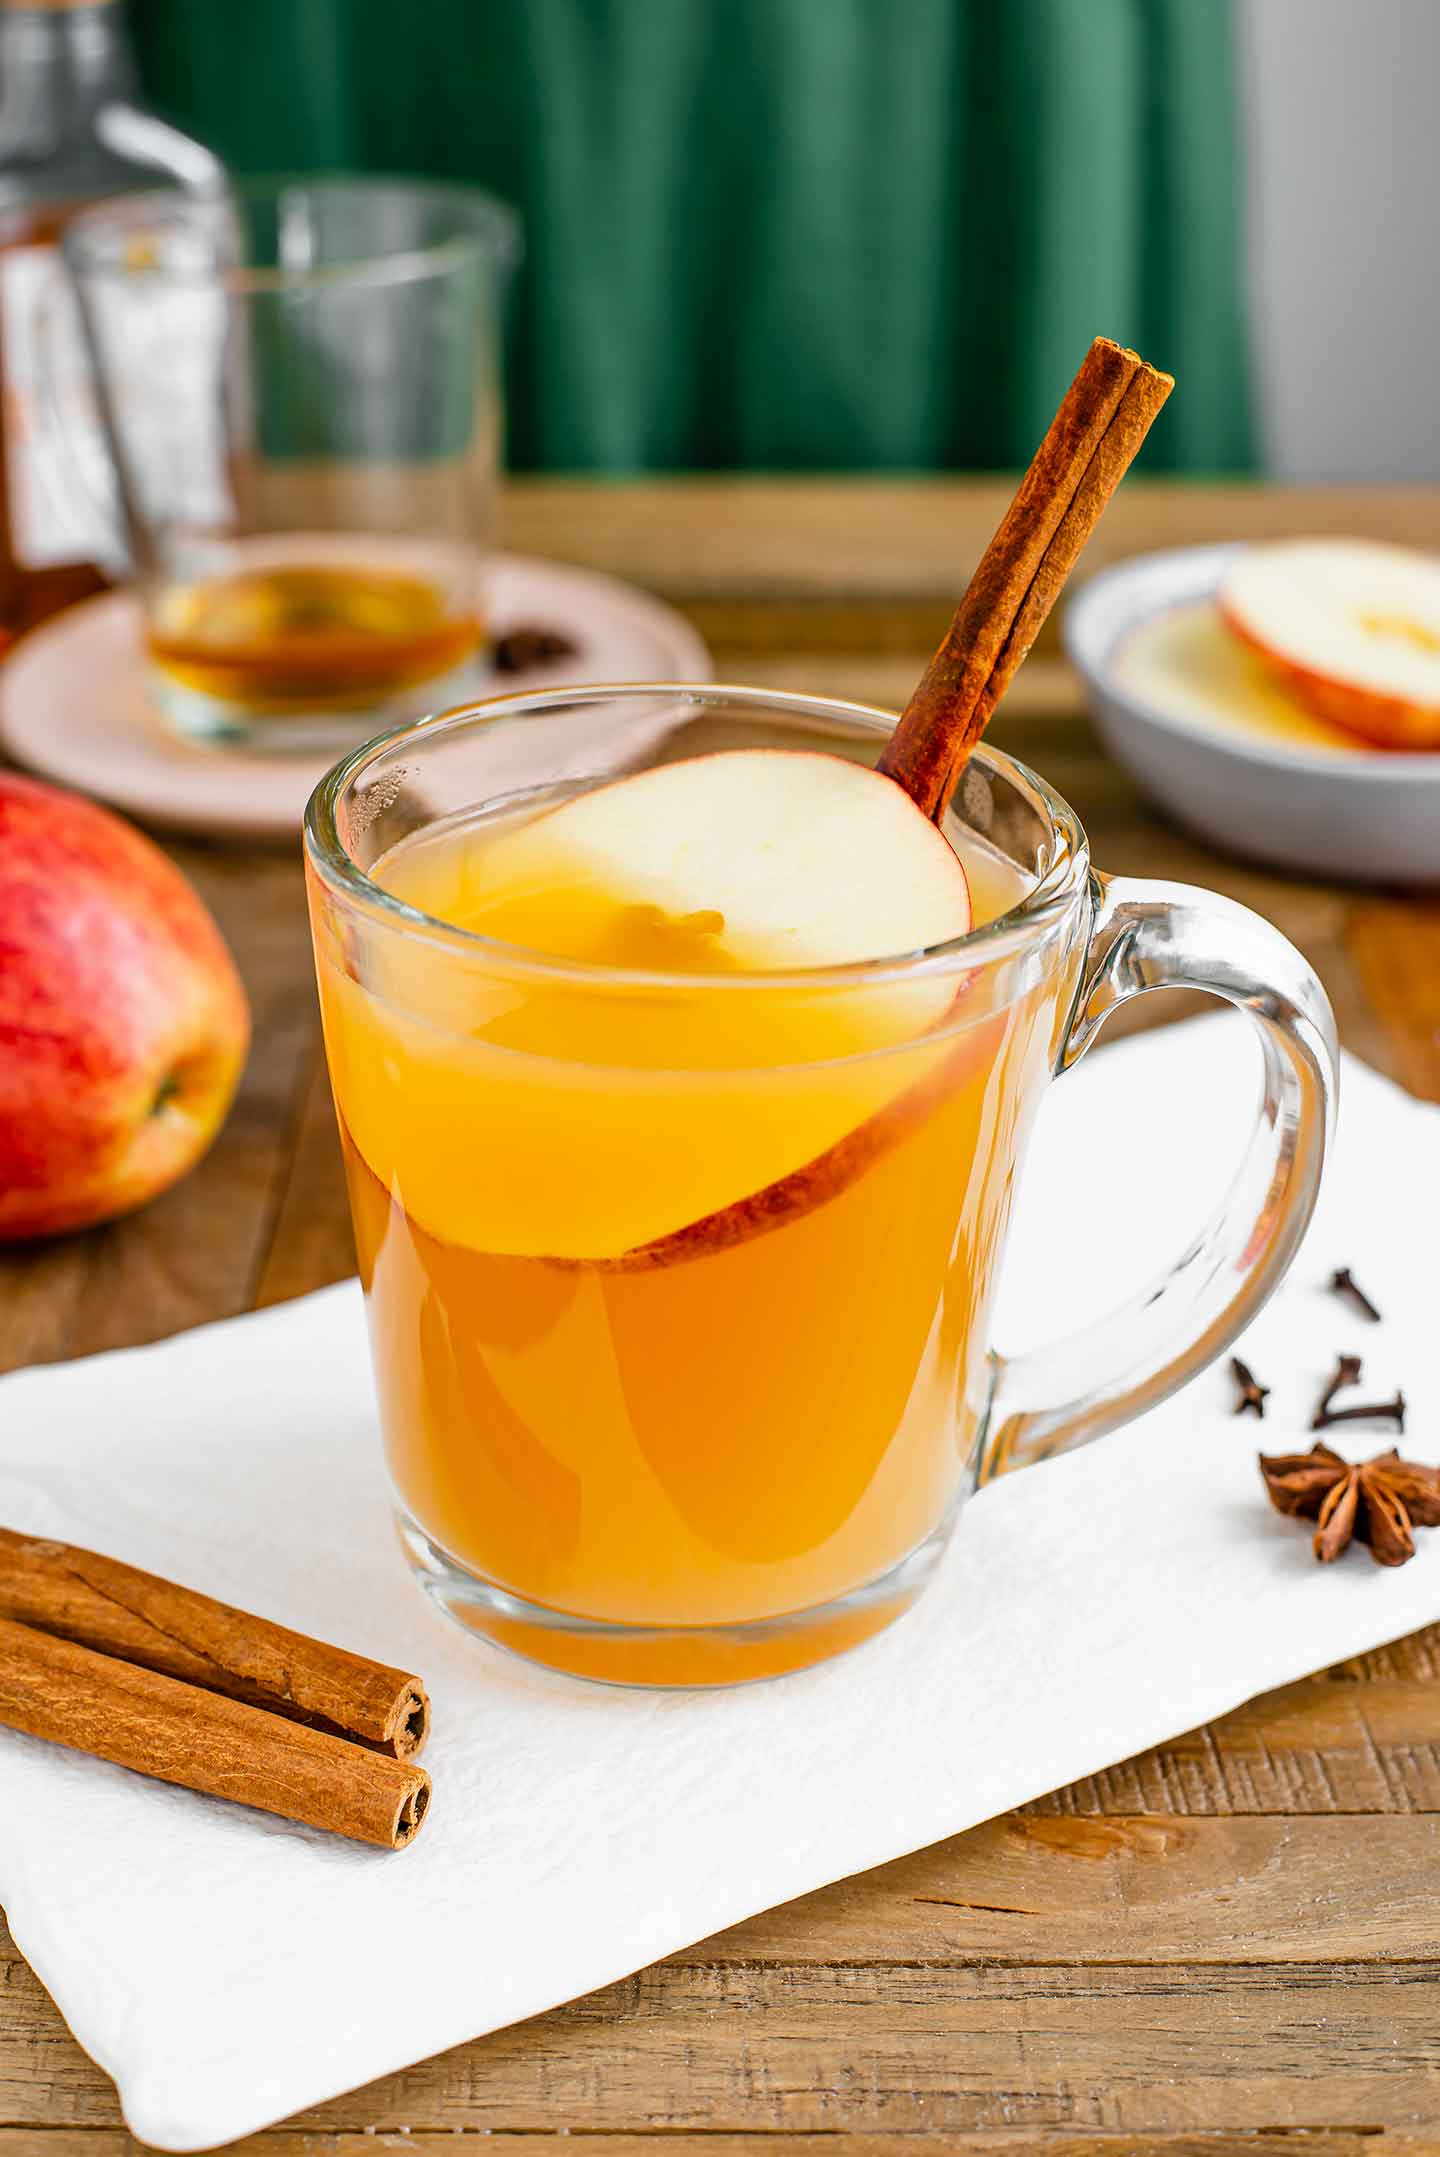 Side view of a glass mug filled with a golden hot wassail. A mug in the background has a small amount of whisky in the bottom and cinnamon sticks, apple slices, and whole cloves are scattered around the mugs.